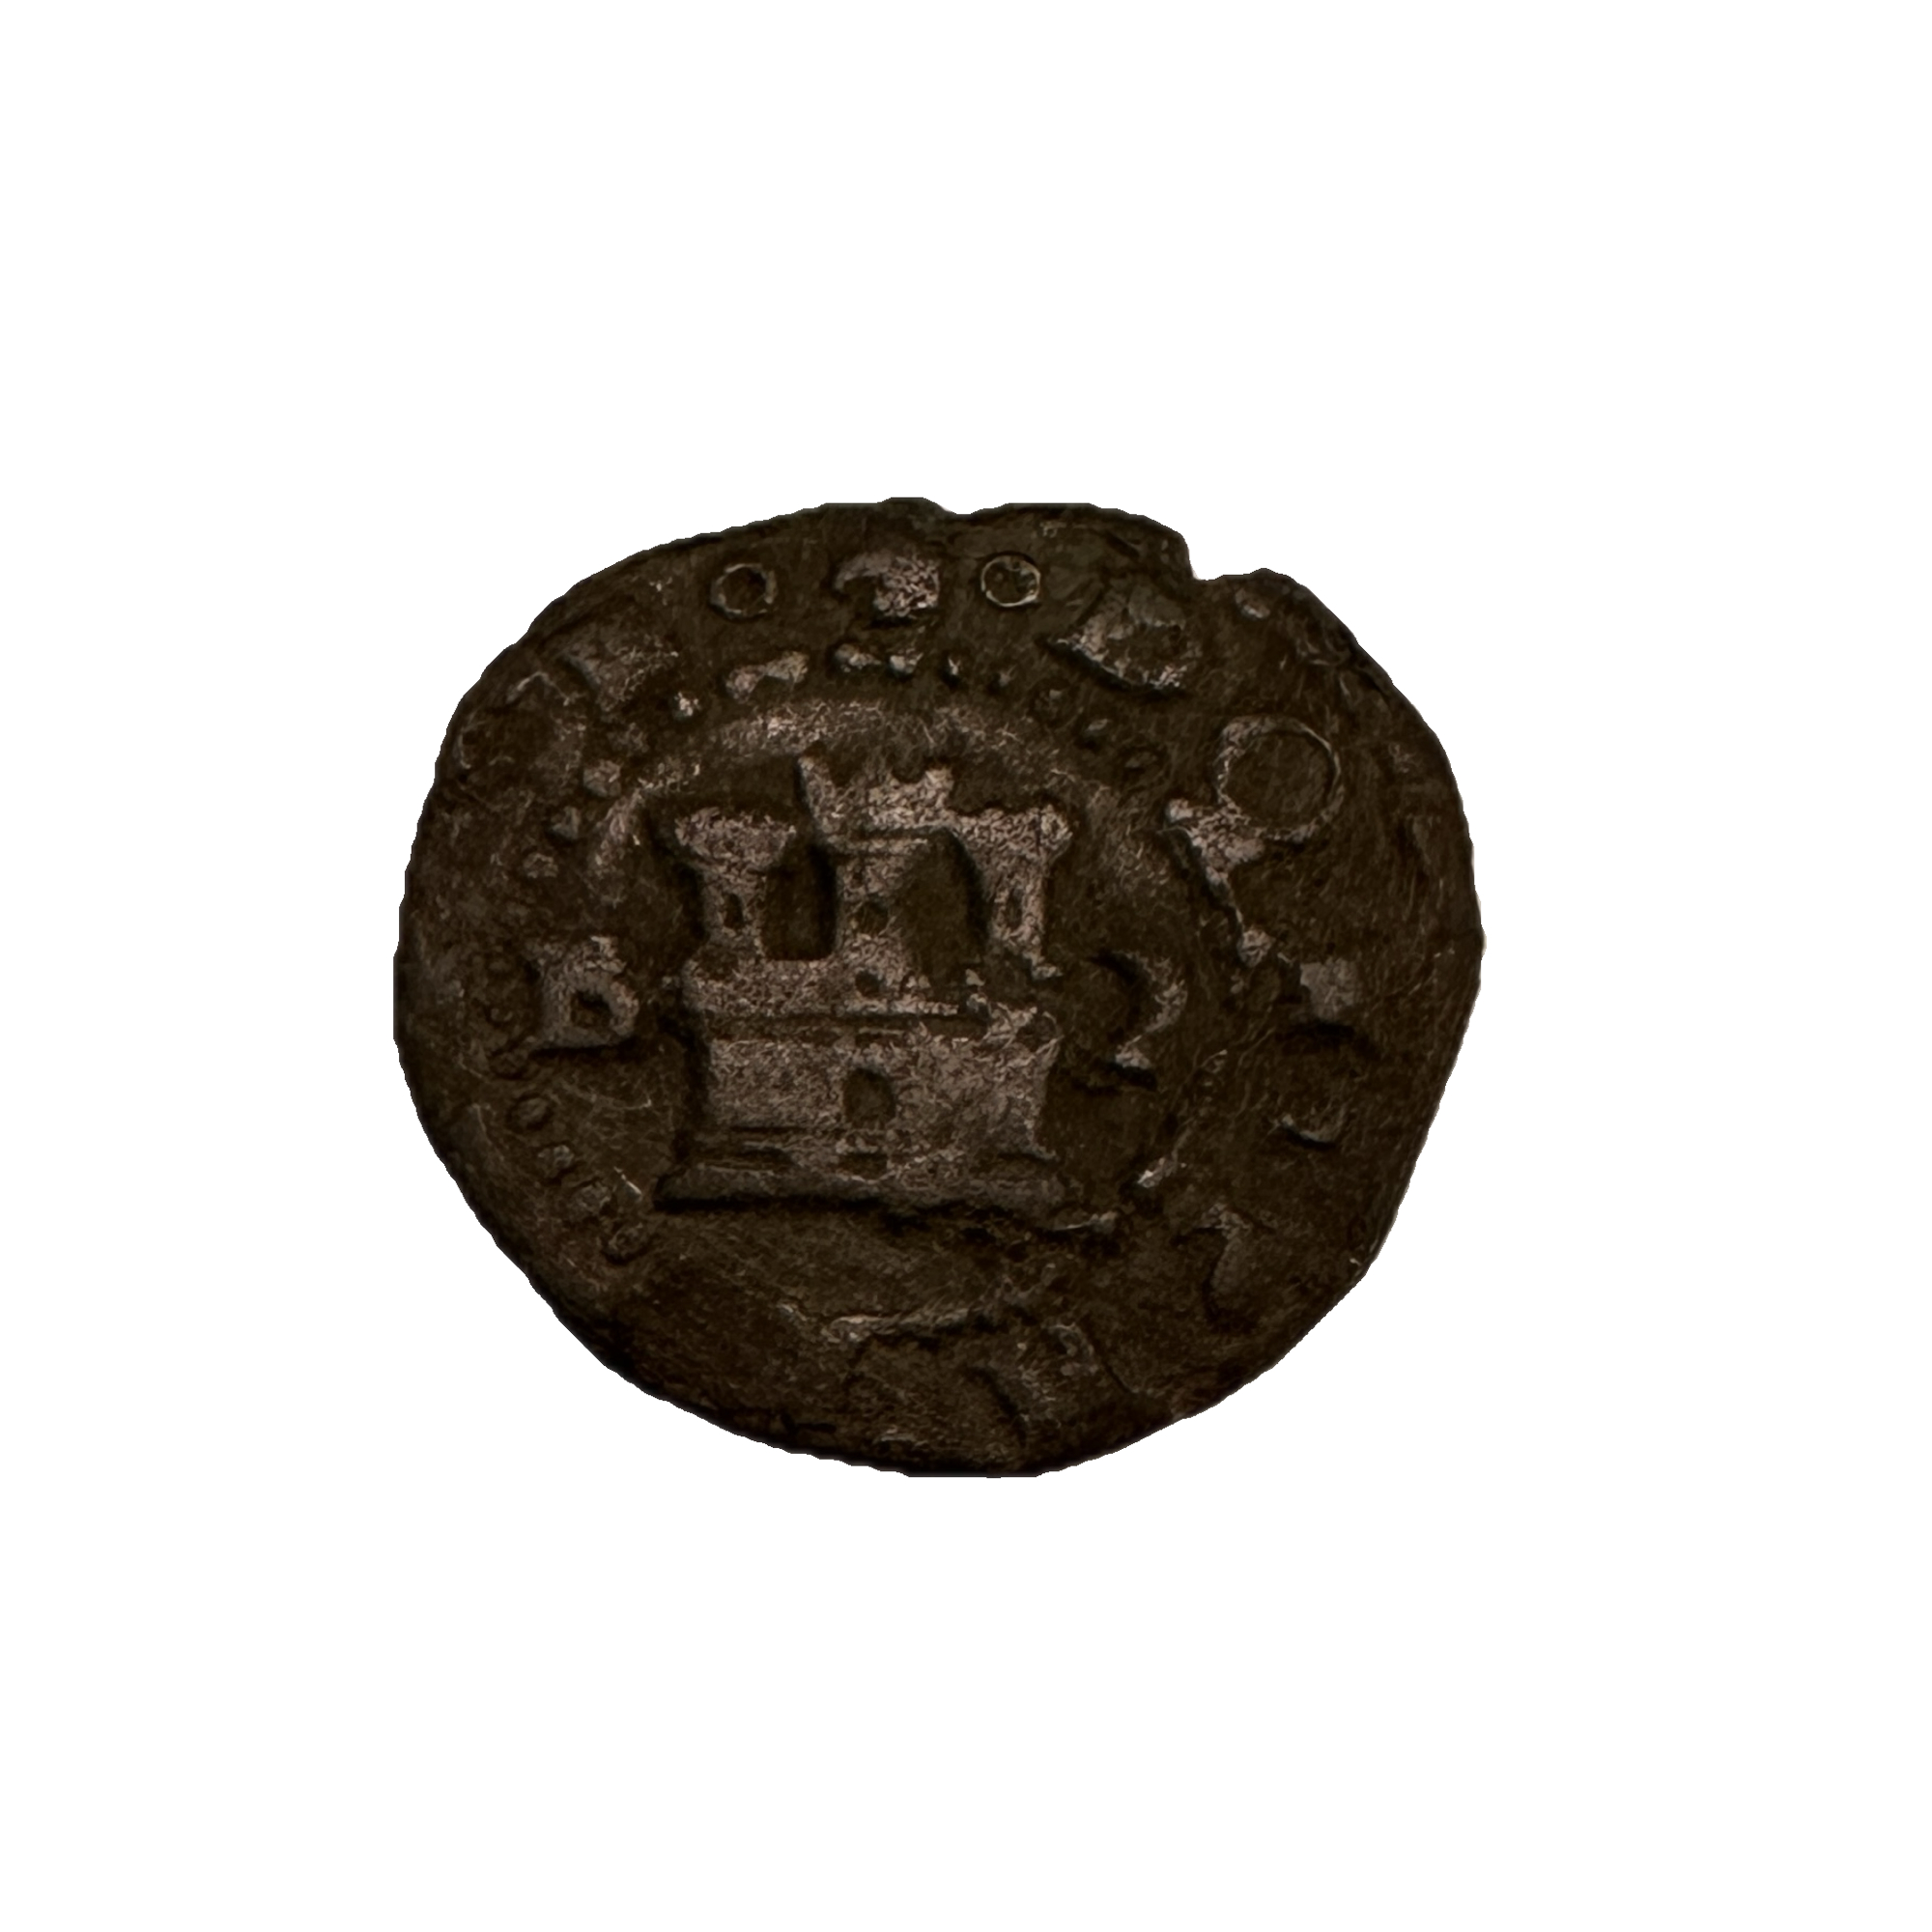 Beautiful spanish pirate coin hand hammered in bronze. Great definition front and back of this 17th century coin.